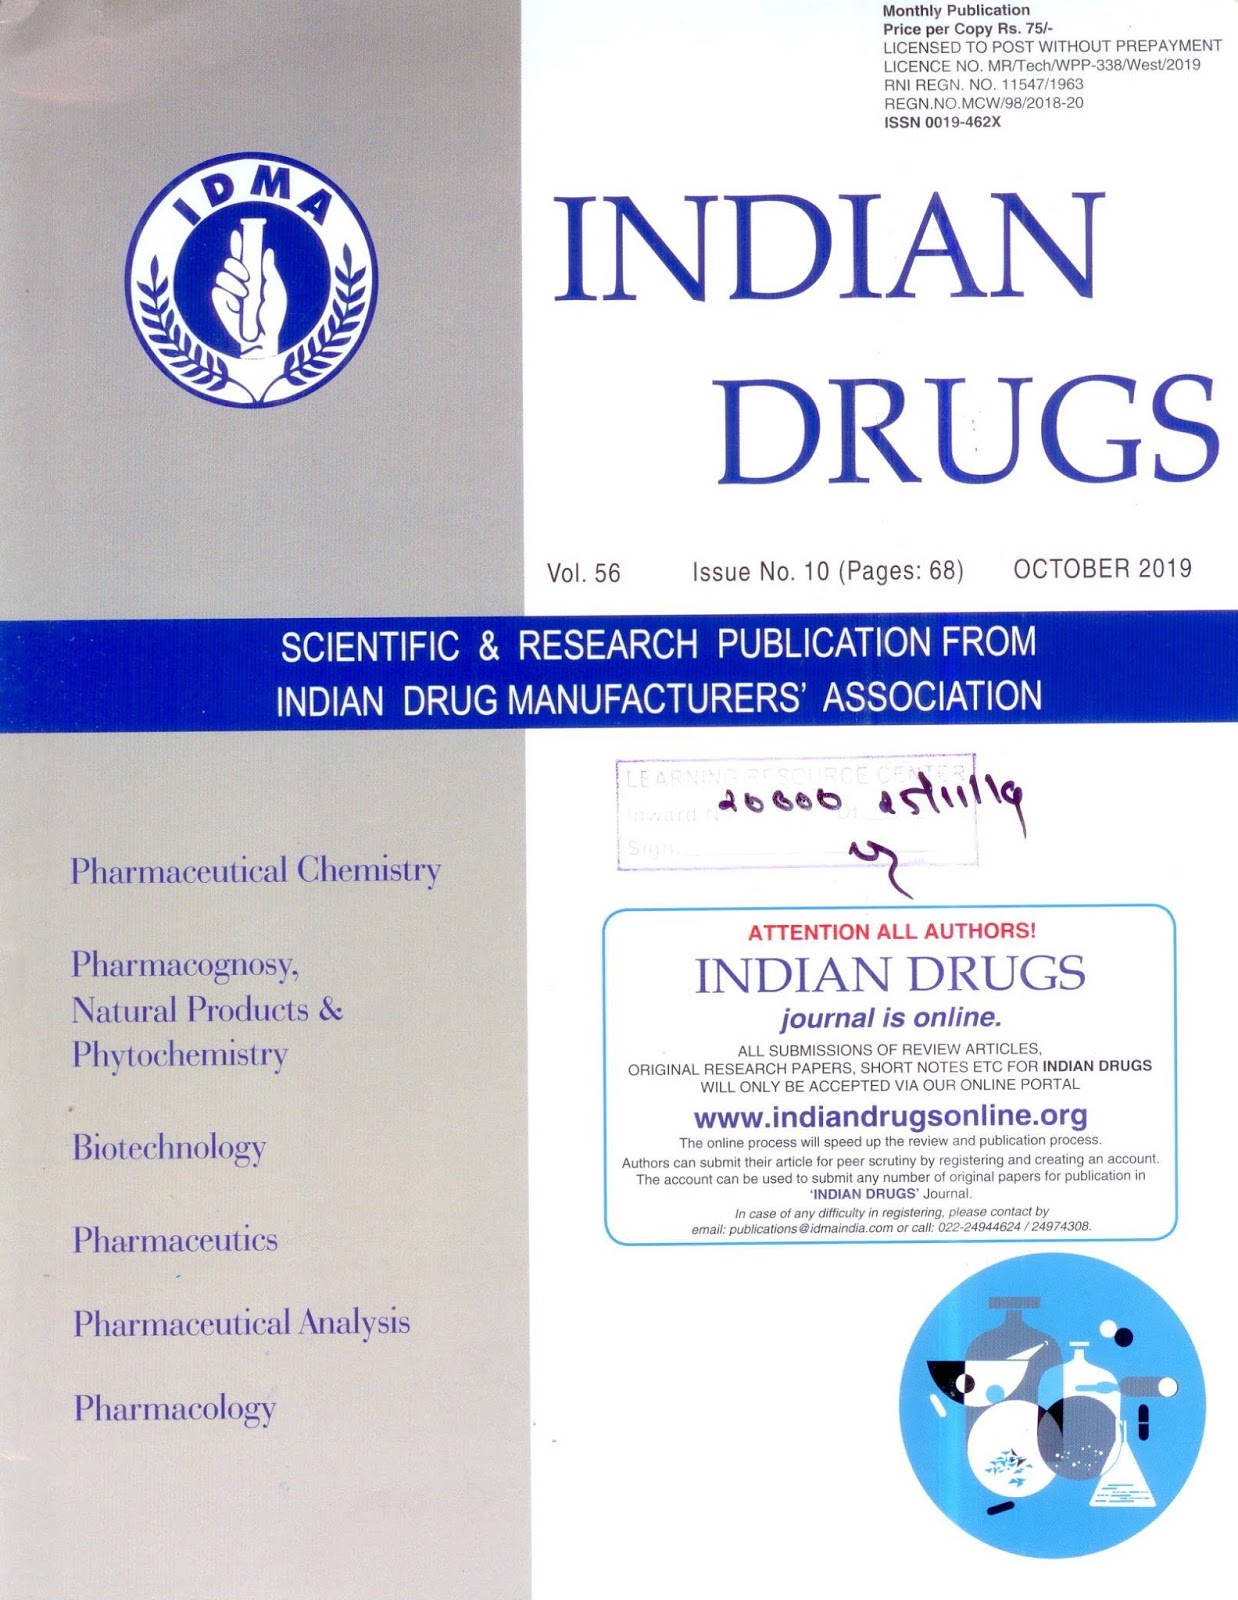 http://www.indiandrugsonline.org/current-issue